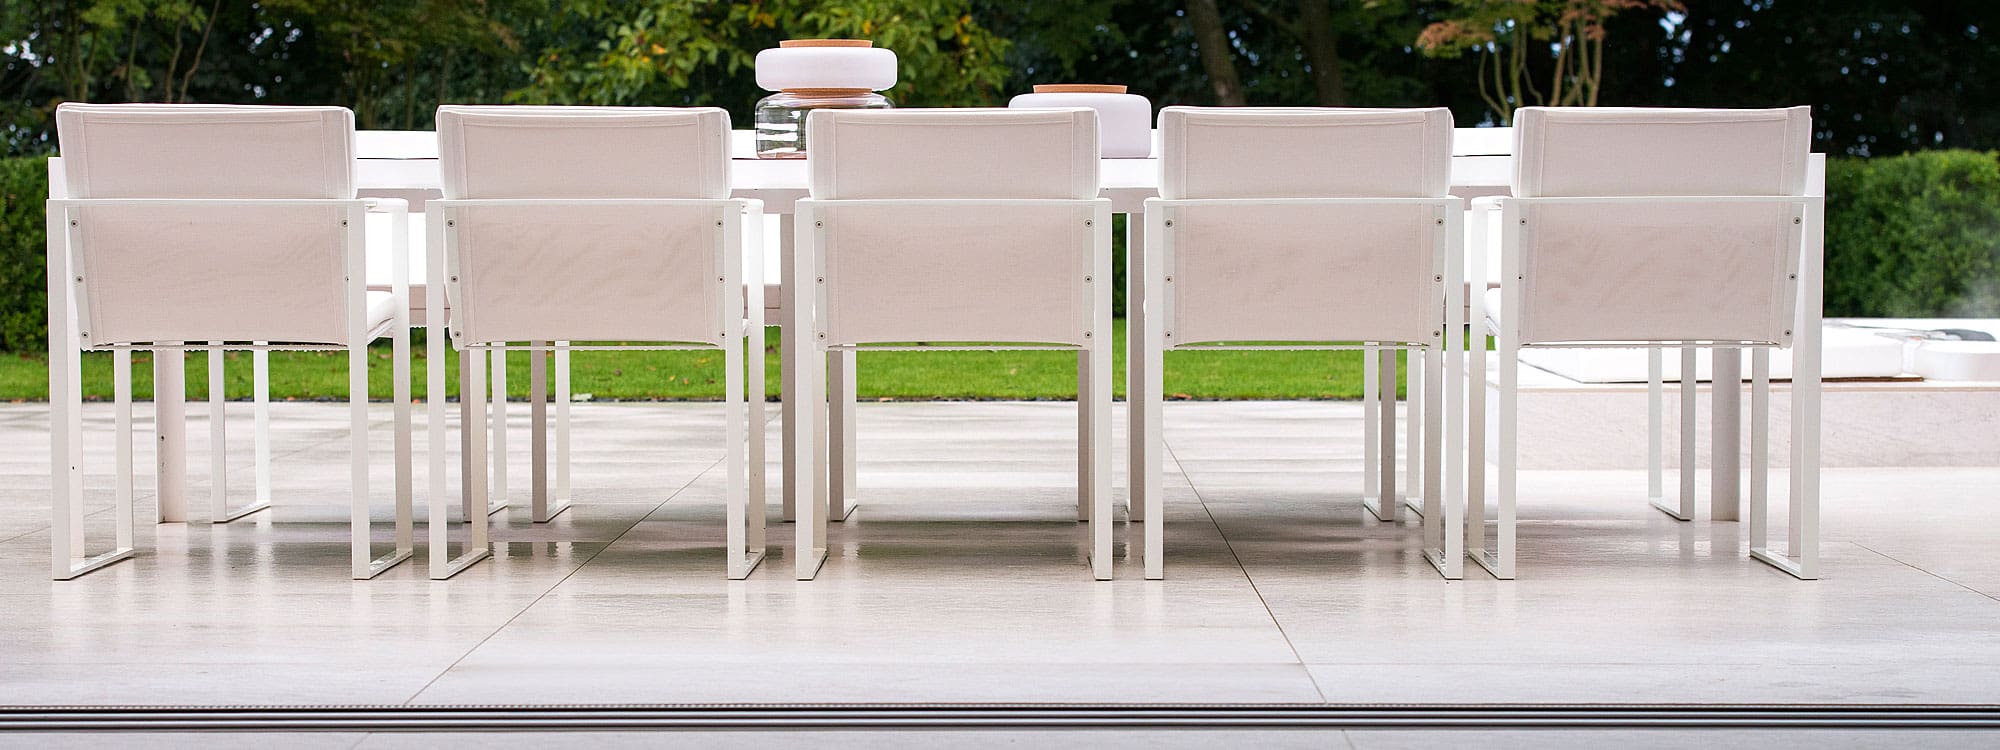 Image of Nimio 12 seat garden table and Butaque white garden chairs by FueraDentro